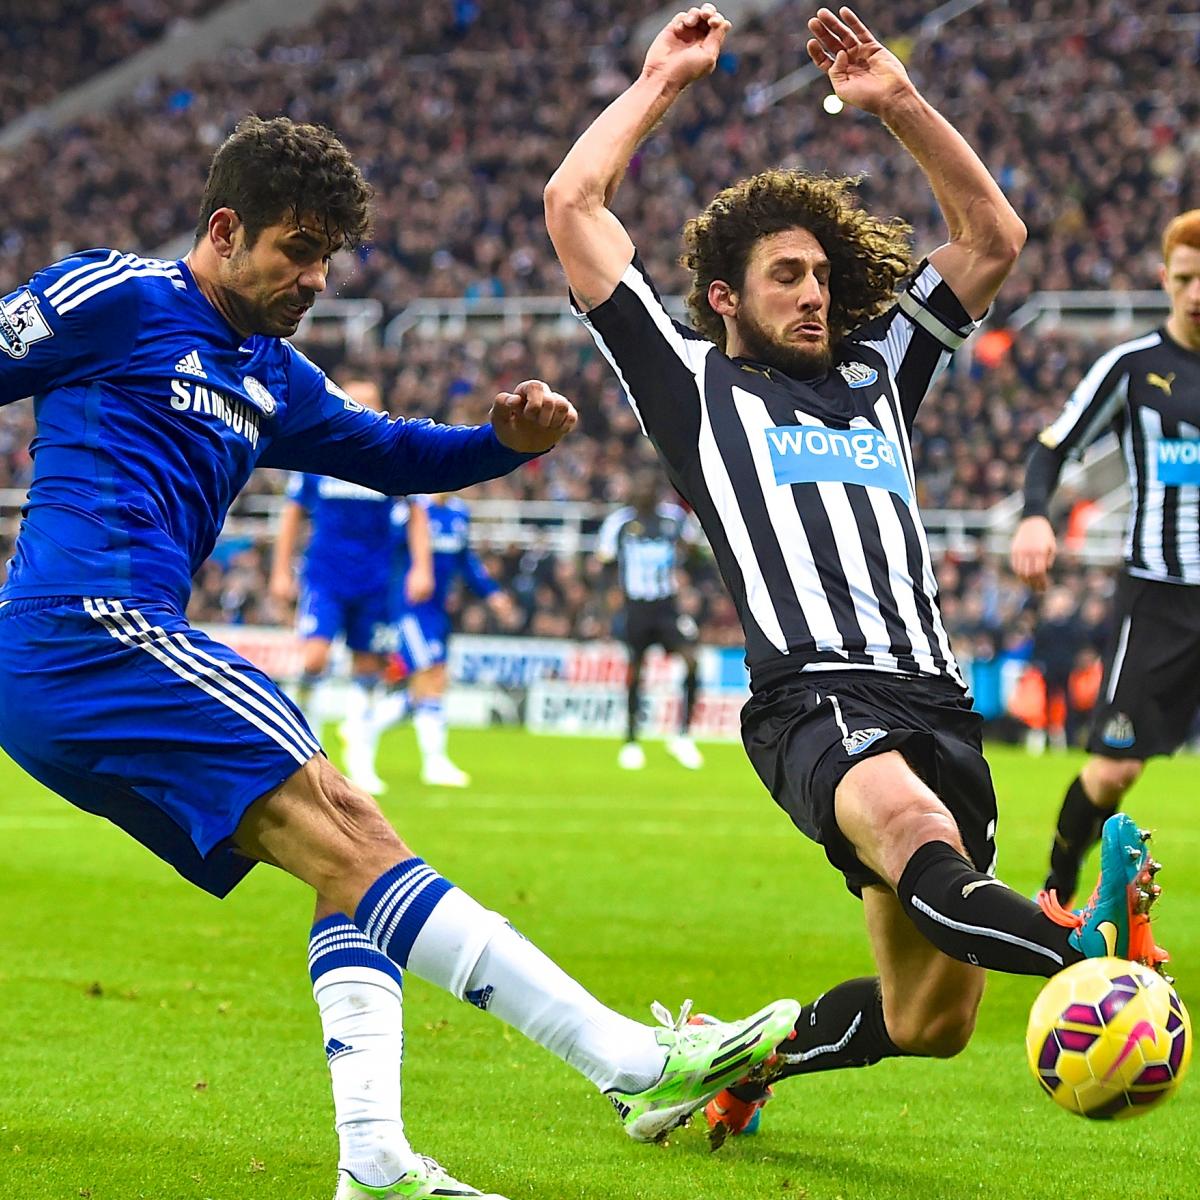 Chelsea vs. Newcastle: Live Score, Highlights from Premier League Game